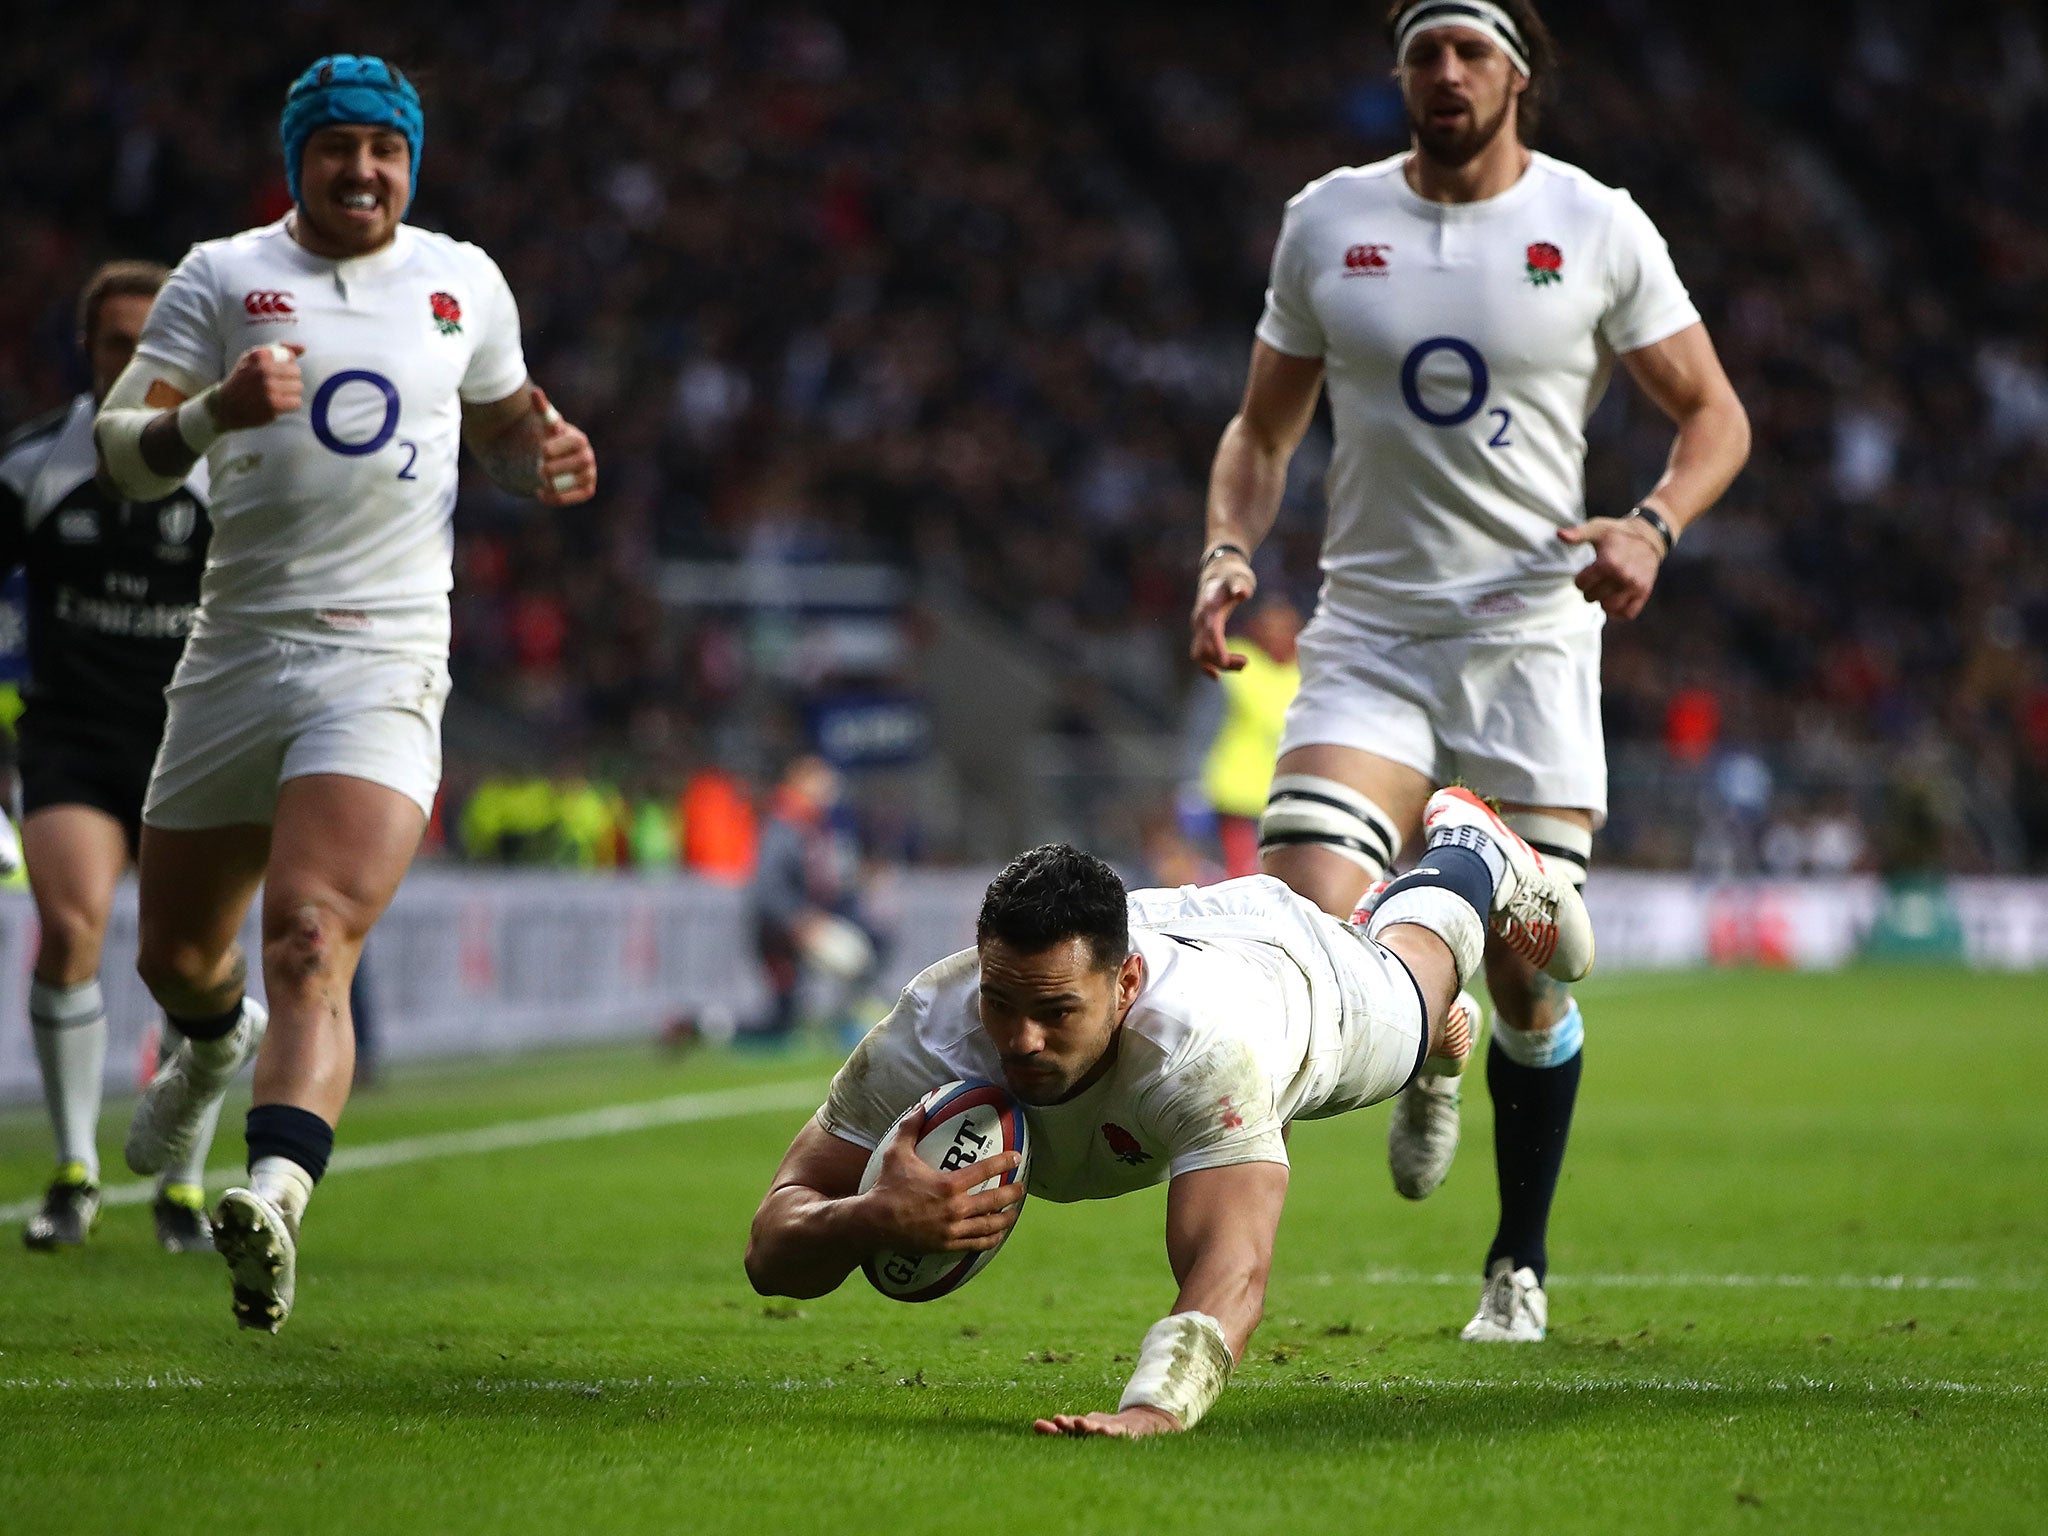 Ben Te'o runs over for his team's fifth try at Twickenham